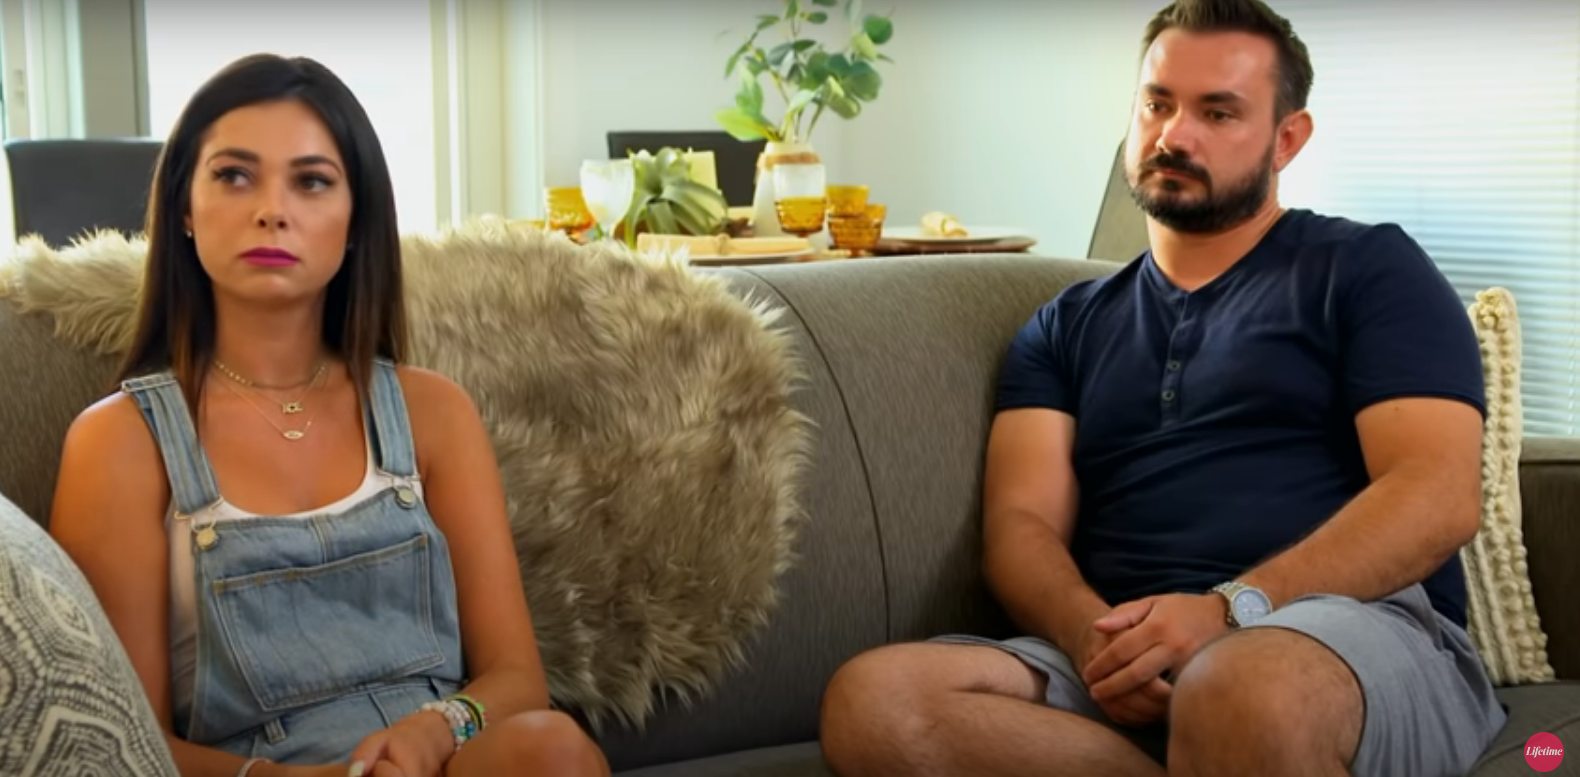 Alyssa and Chris sitting on a couch in 'Married at First Sight'